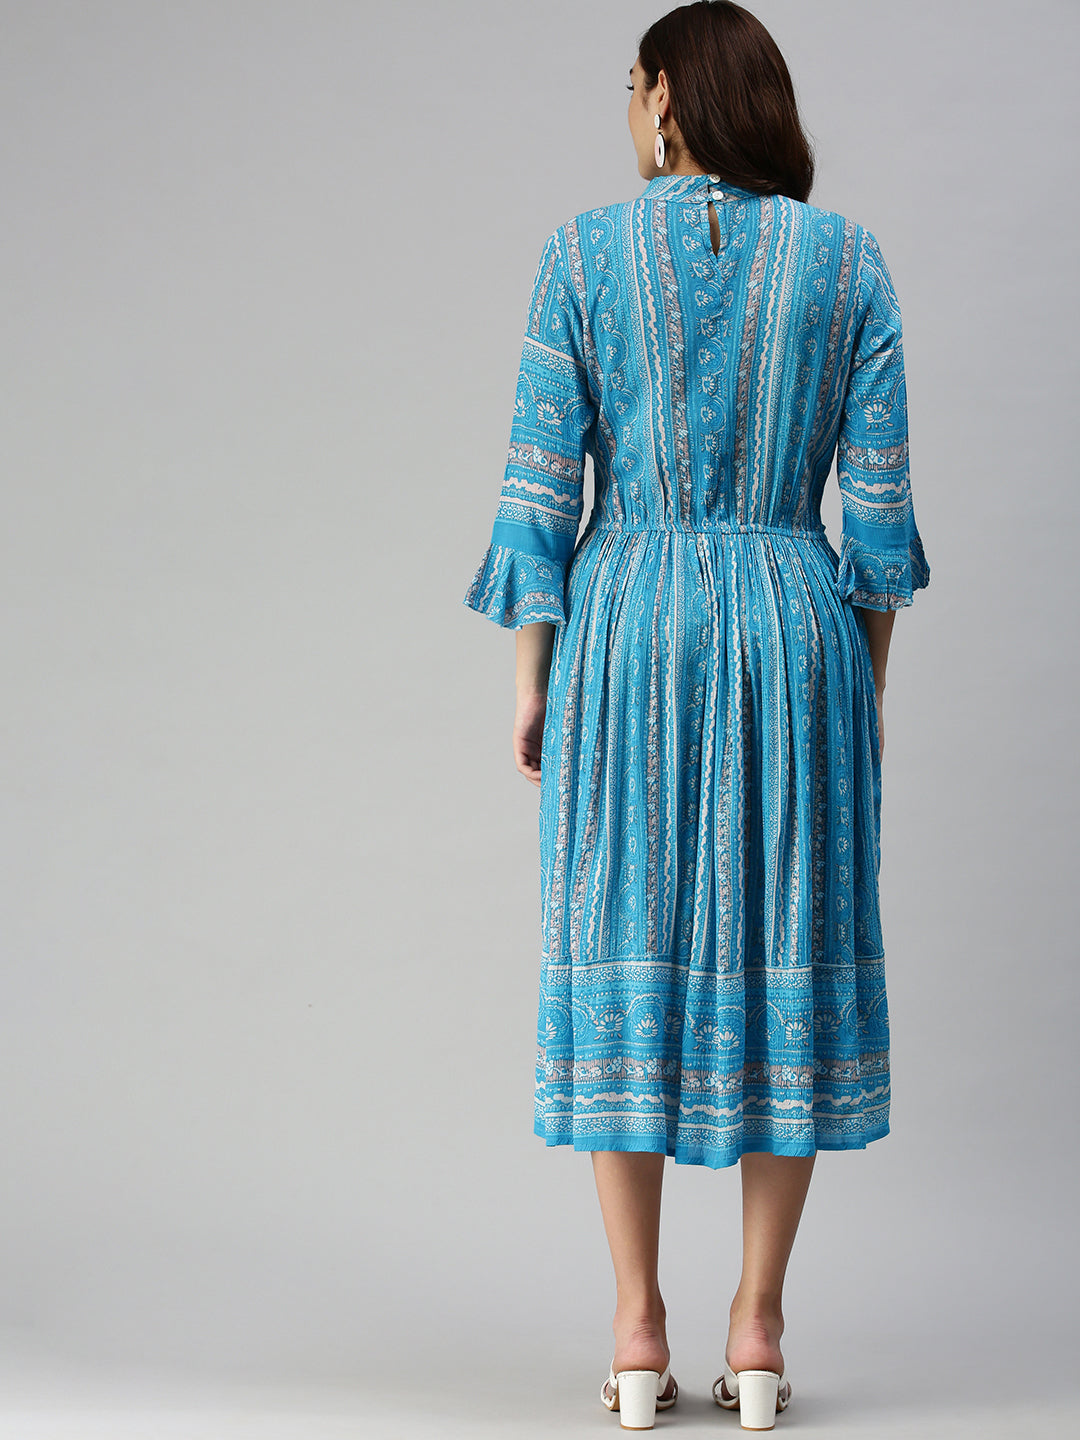 Women Printed Fit and Flare Turquoise Blue Dress